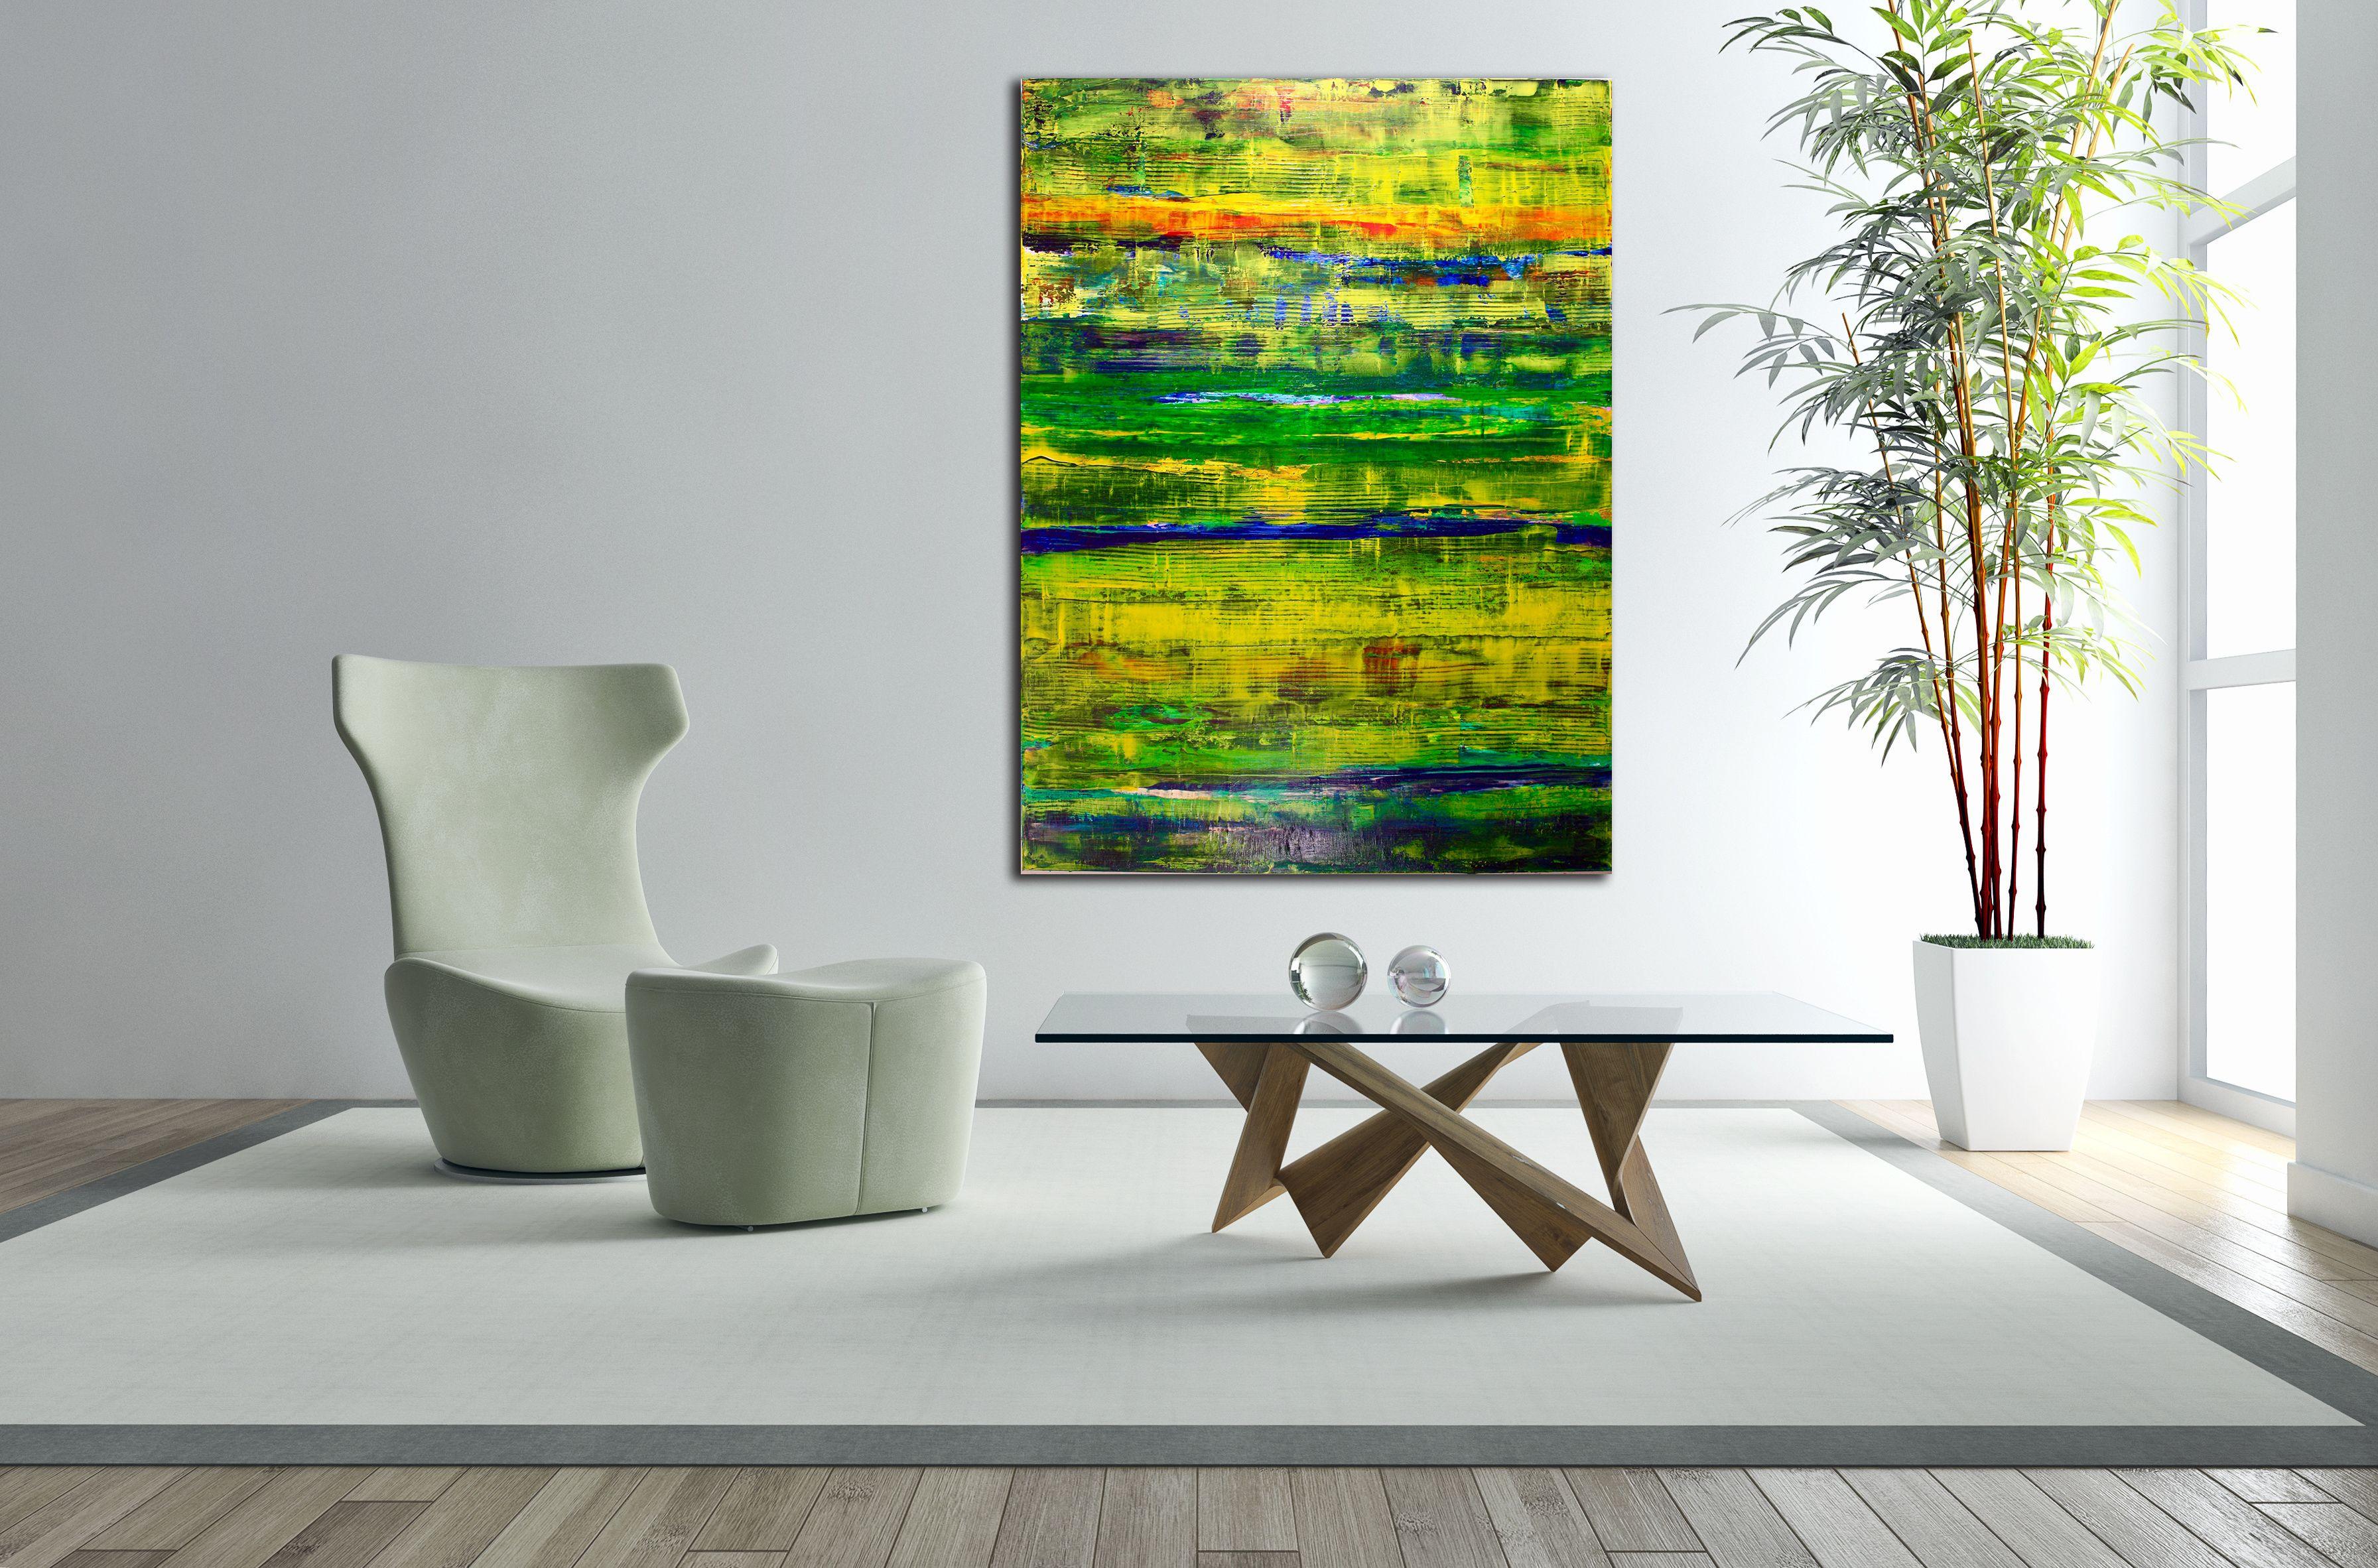 - READY TO HANG  - SIGNED CANVAS  - BOLD STATEMENT PIECE  - SIGNED CERTIFICATE OF AUTHENTICITY    Textured colorfield piece, layered with gesso and molded to create depth. This painting is interference which makes it change tones from different